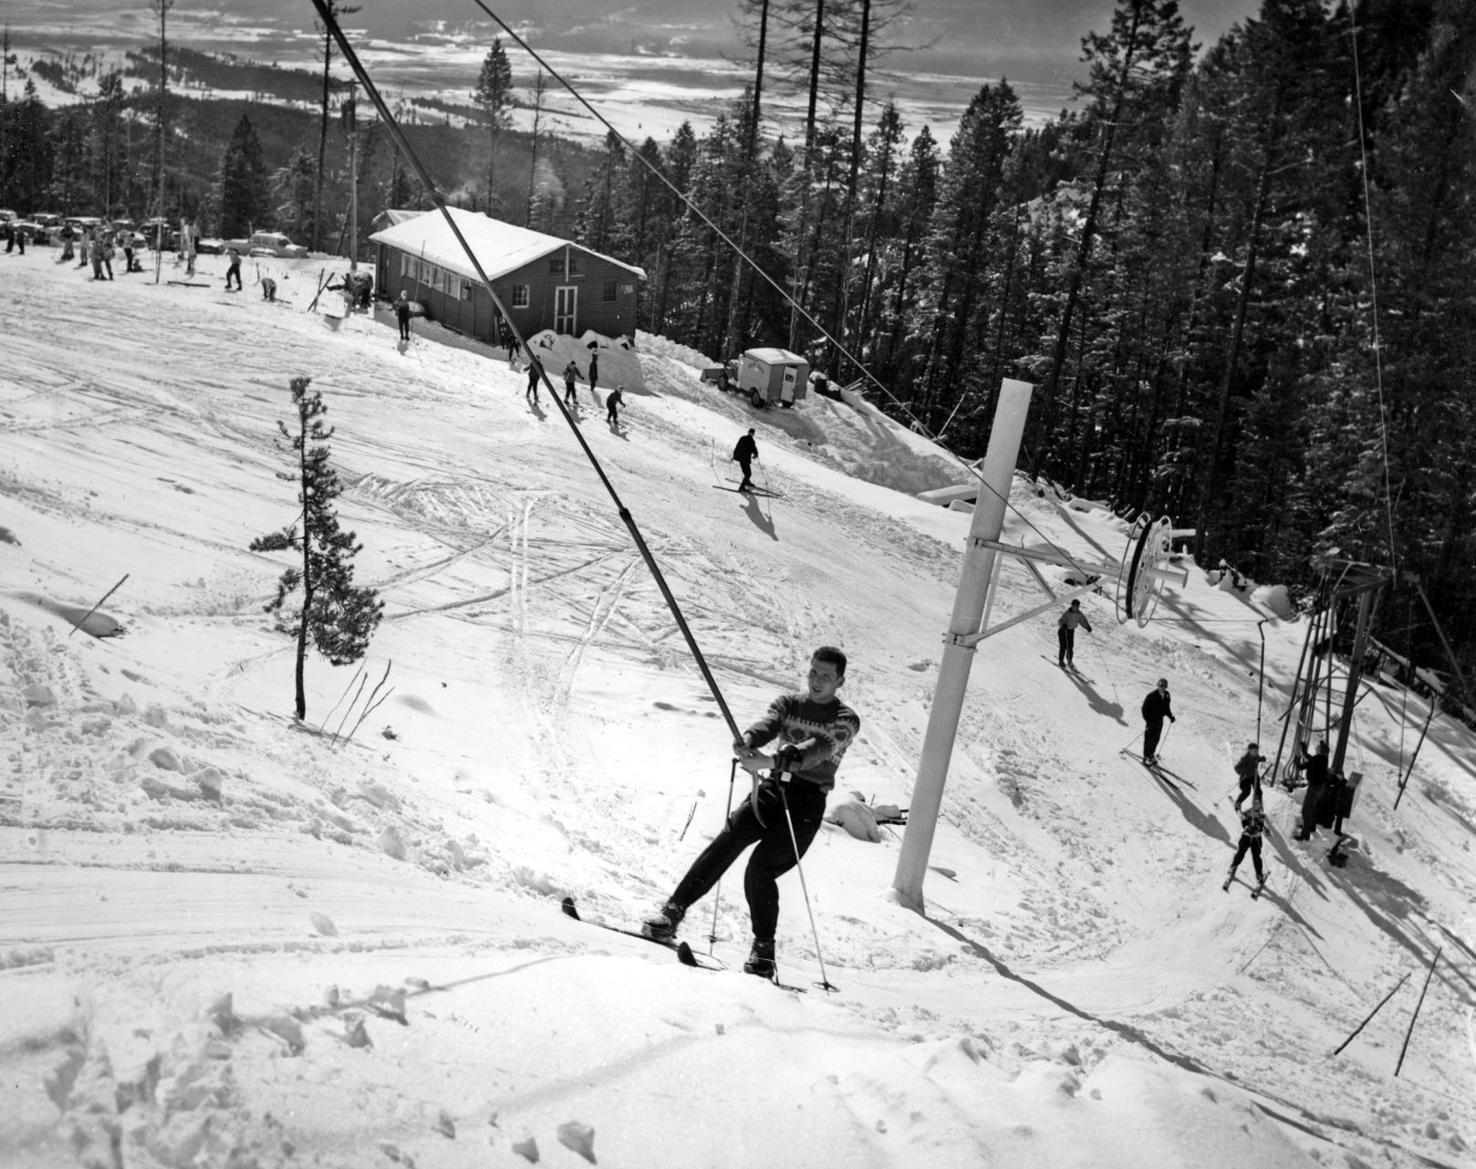 62 years of skiing in Missoula: Local author publishes pictorial history of Snowbowl